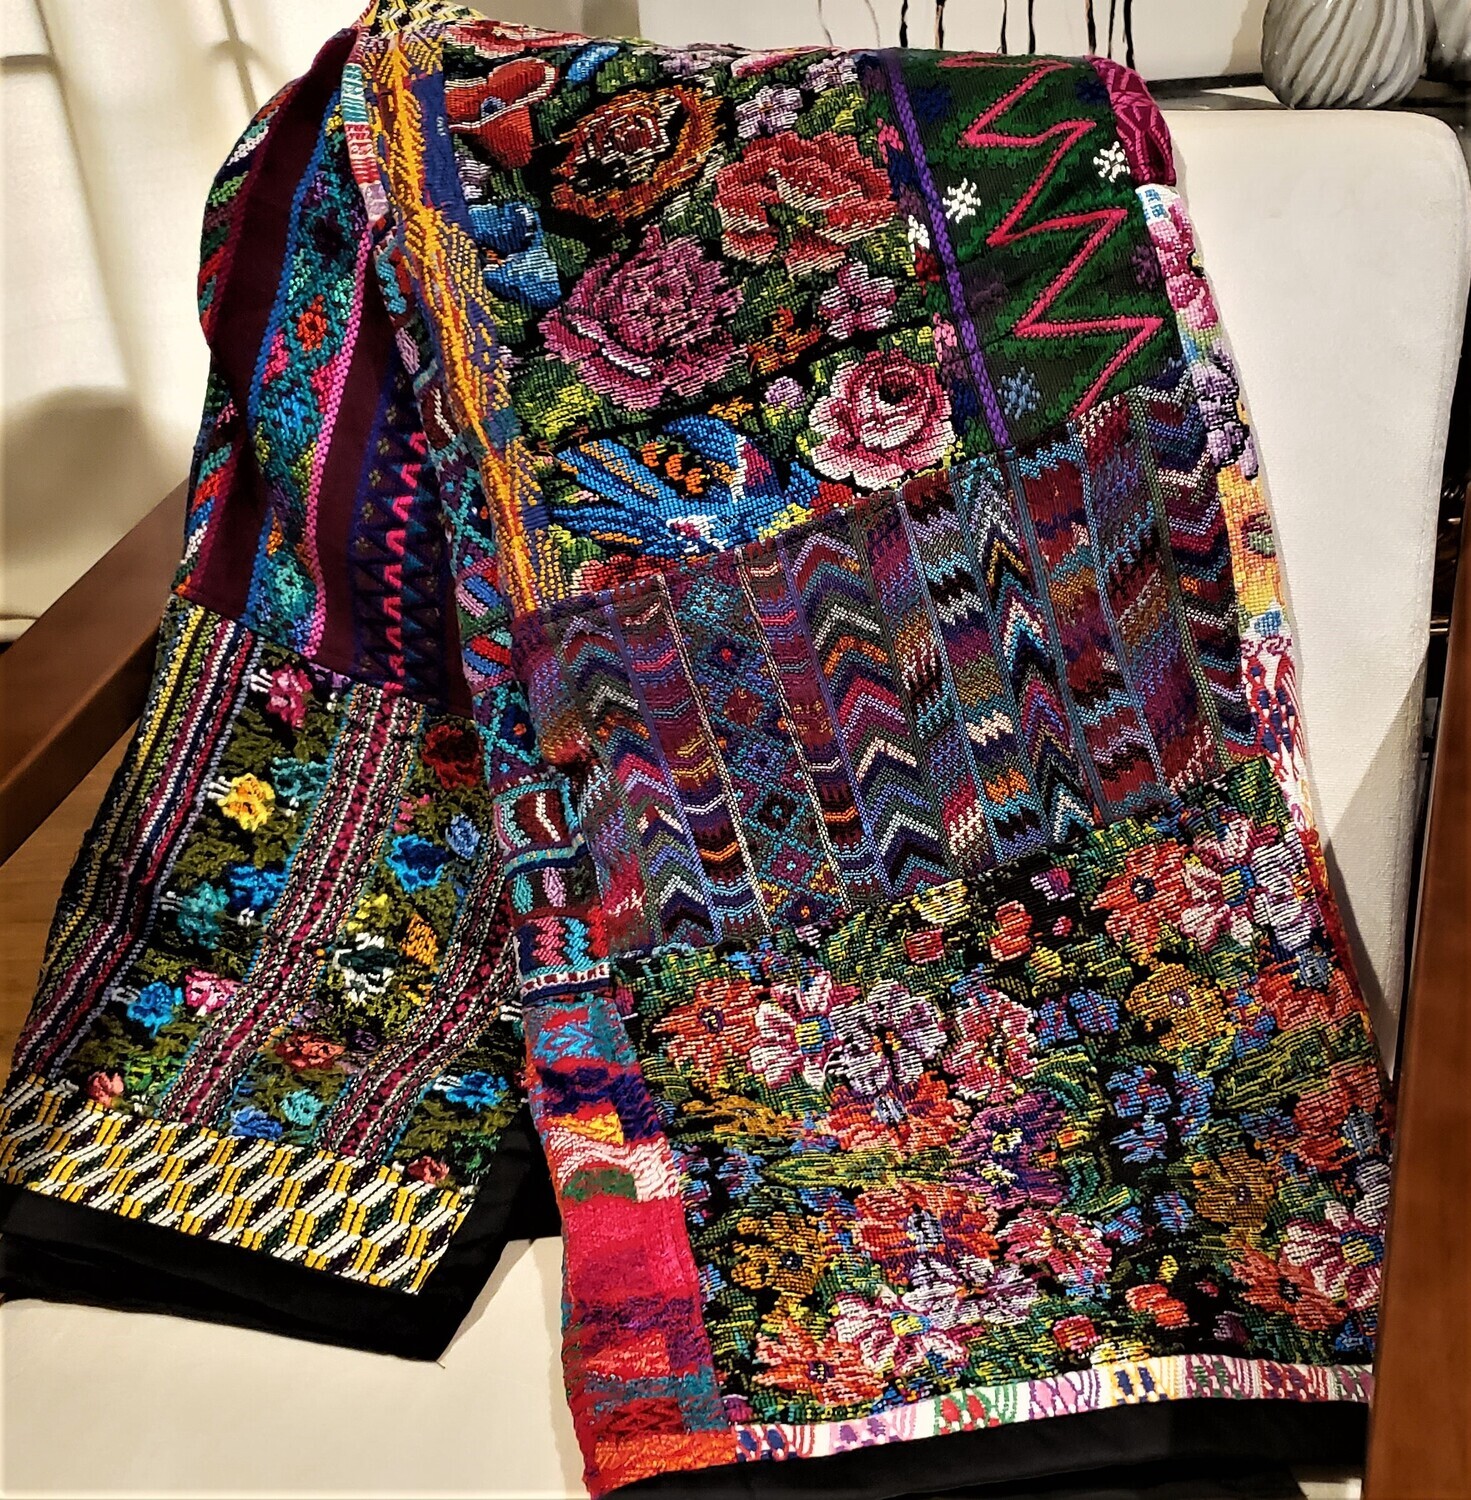 Mixed Huipile Embroidered  Lap  Blanket or Throw.